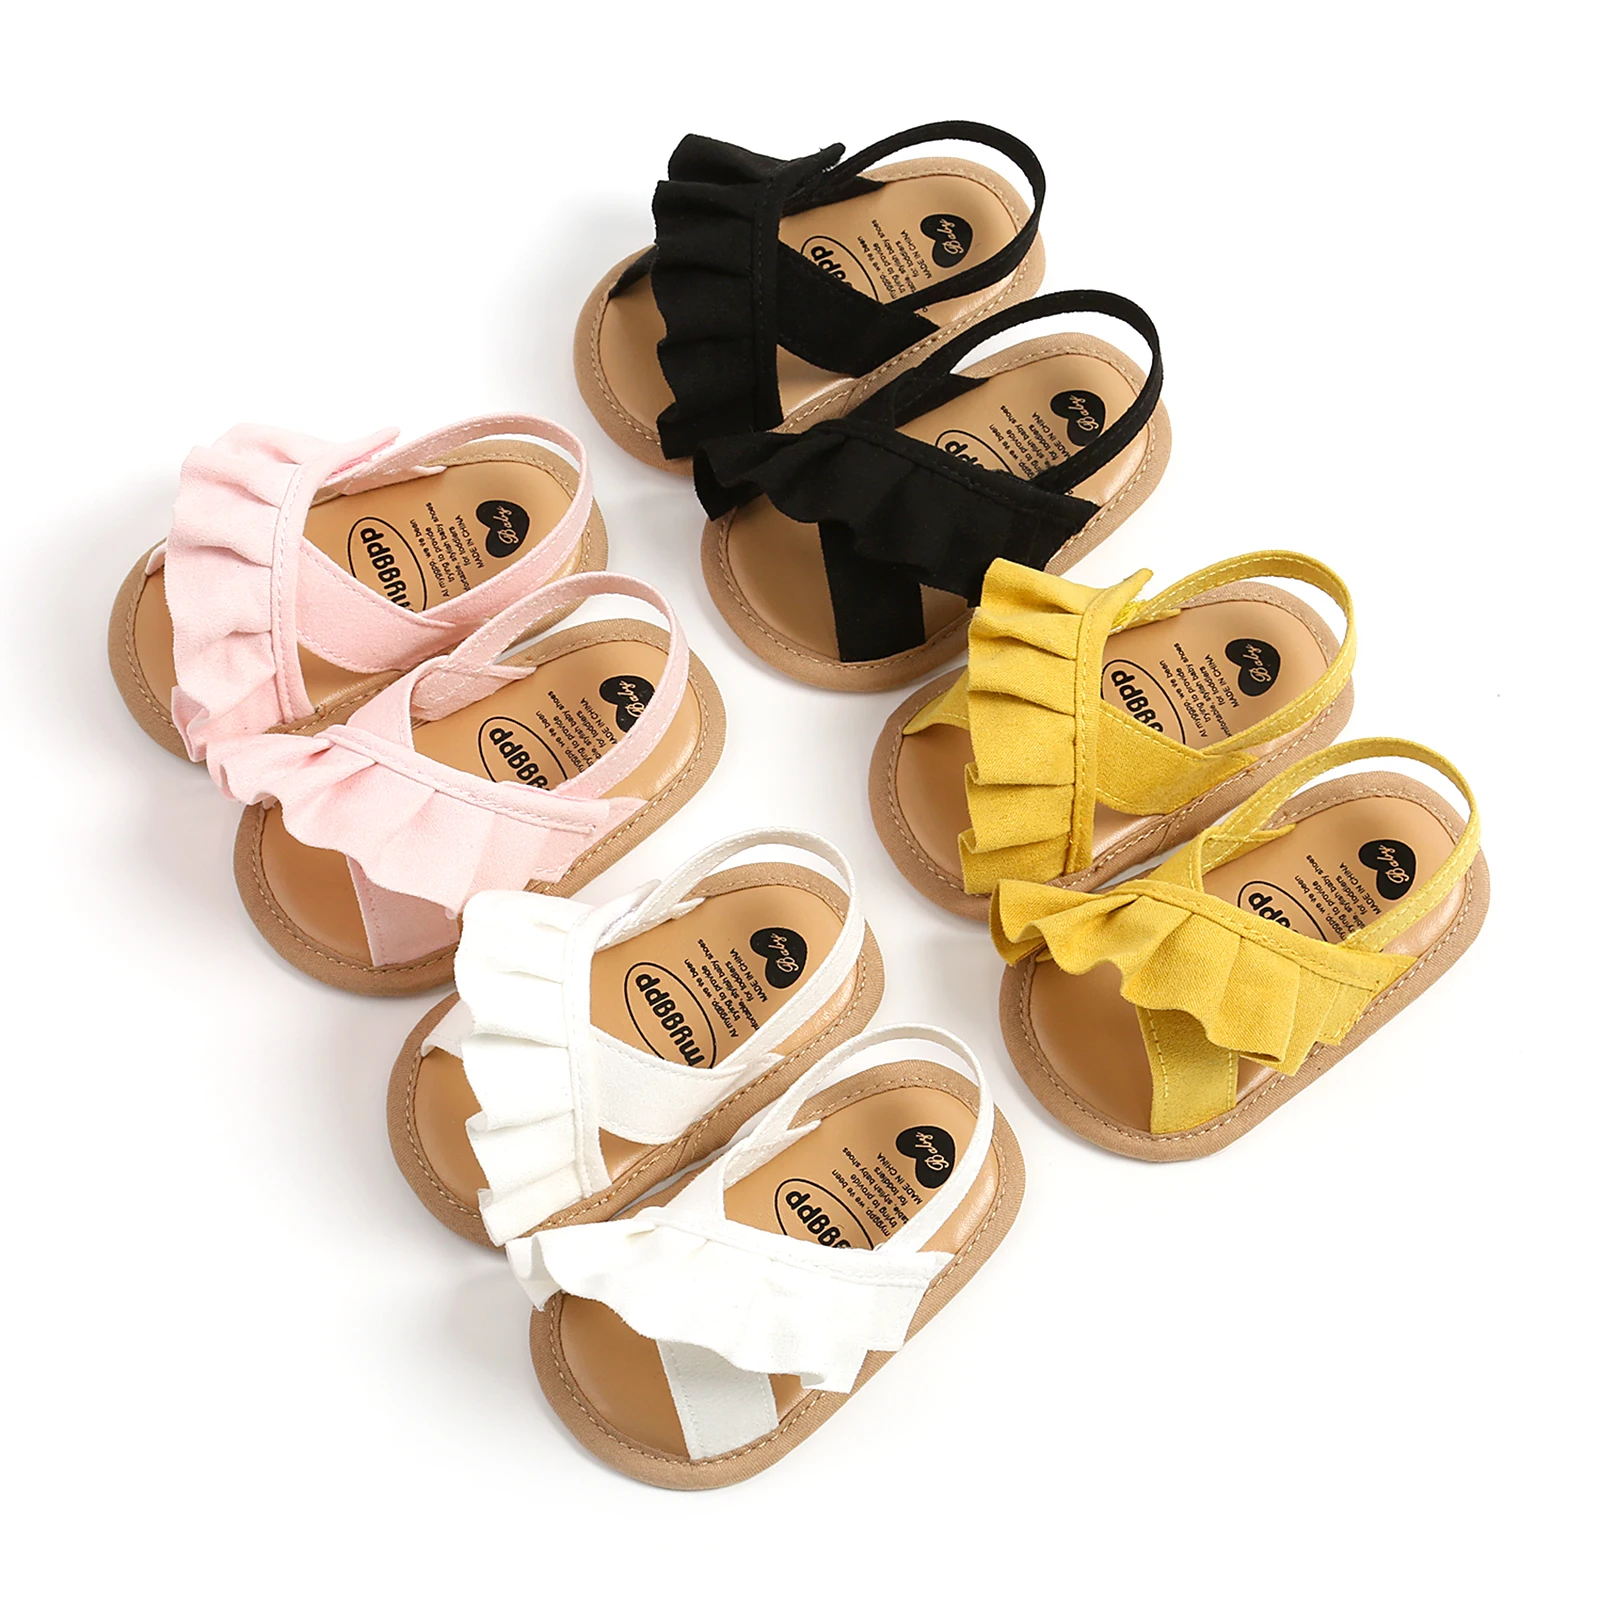 EWODOS Baby Girl Summer Sandals Cute Ruffle Flats Non-Slip Soft Sole Infant Babies Kids First Walkers Clogs Suede Sandals